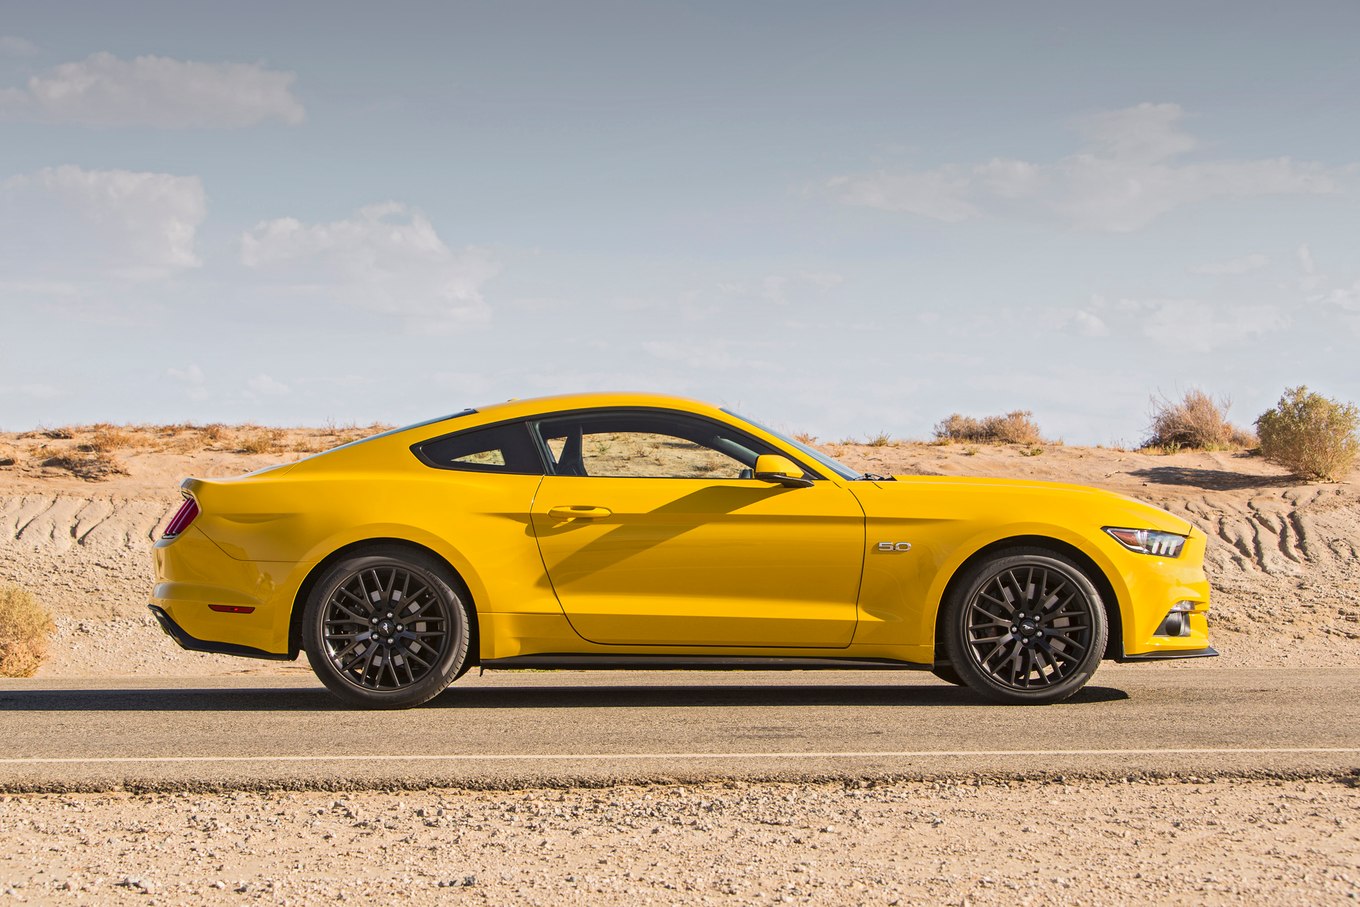 S650 Mustang 2021 MUSTANG (S650) - 7th Generation Mustang Confirmed 2015-Ford-Mustang-GT-side-profile